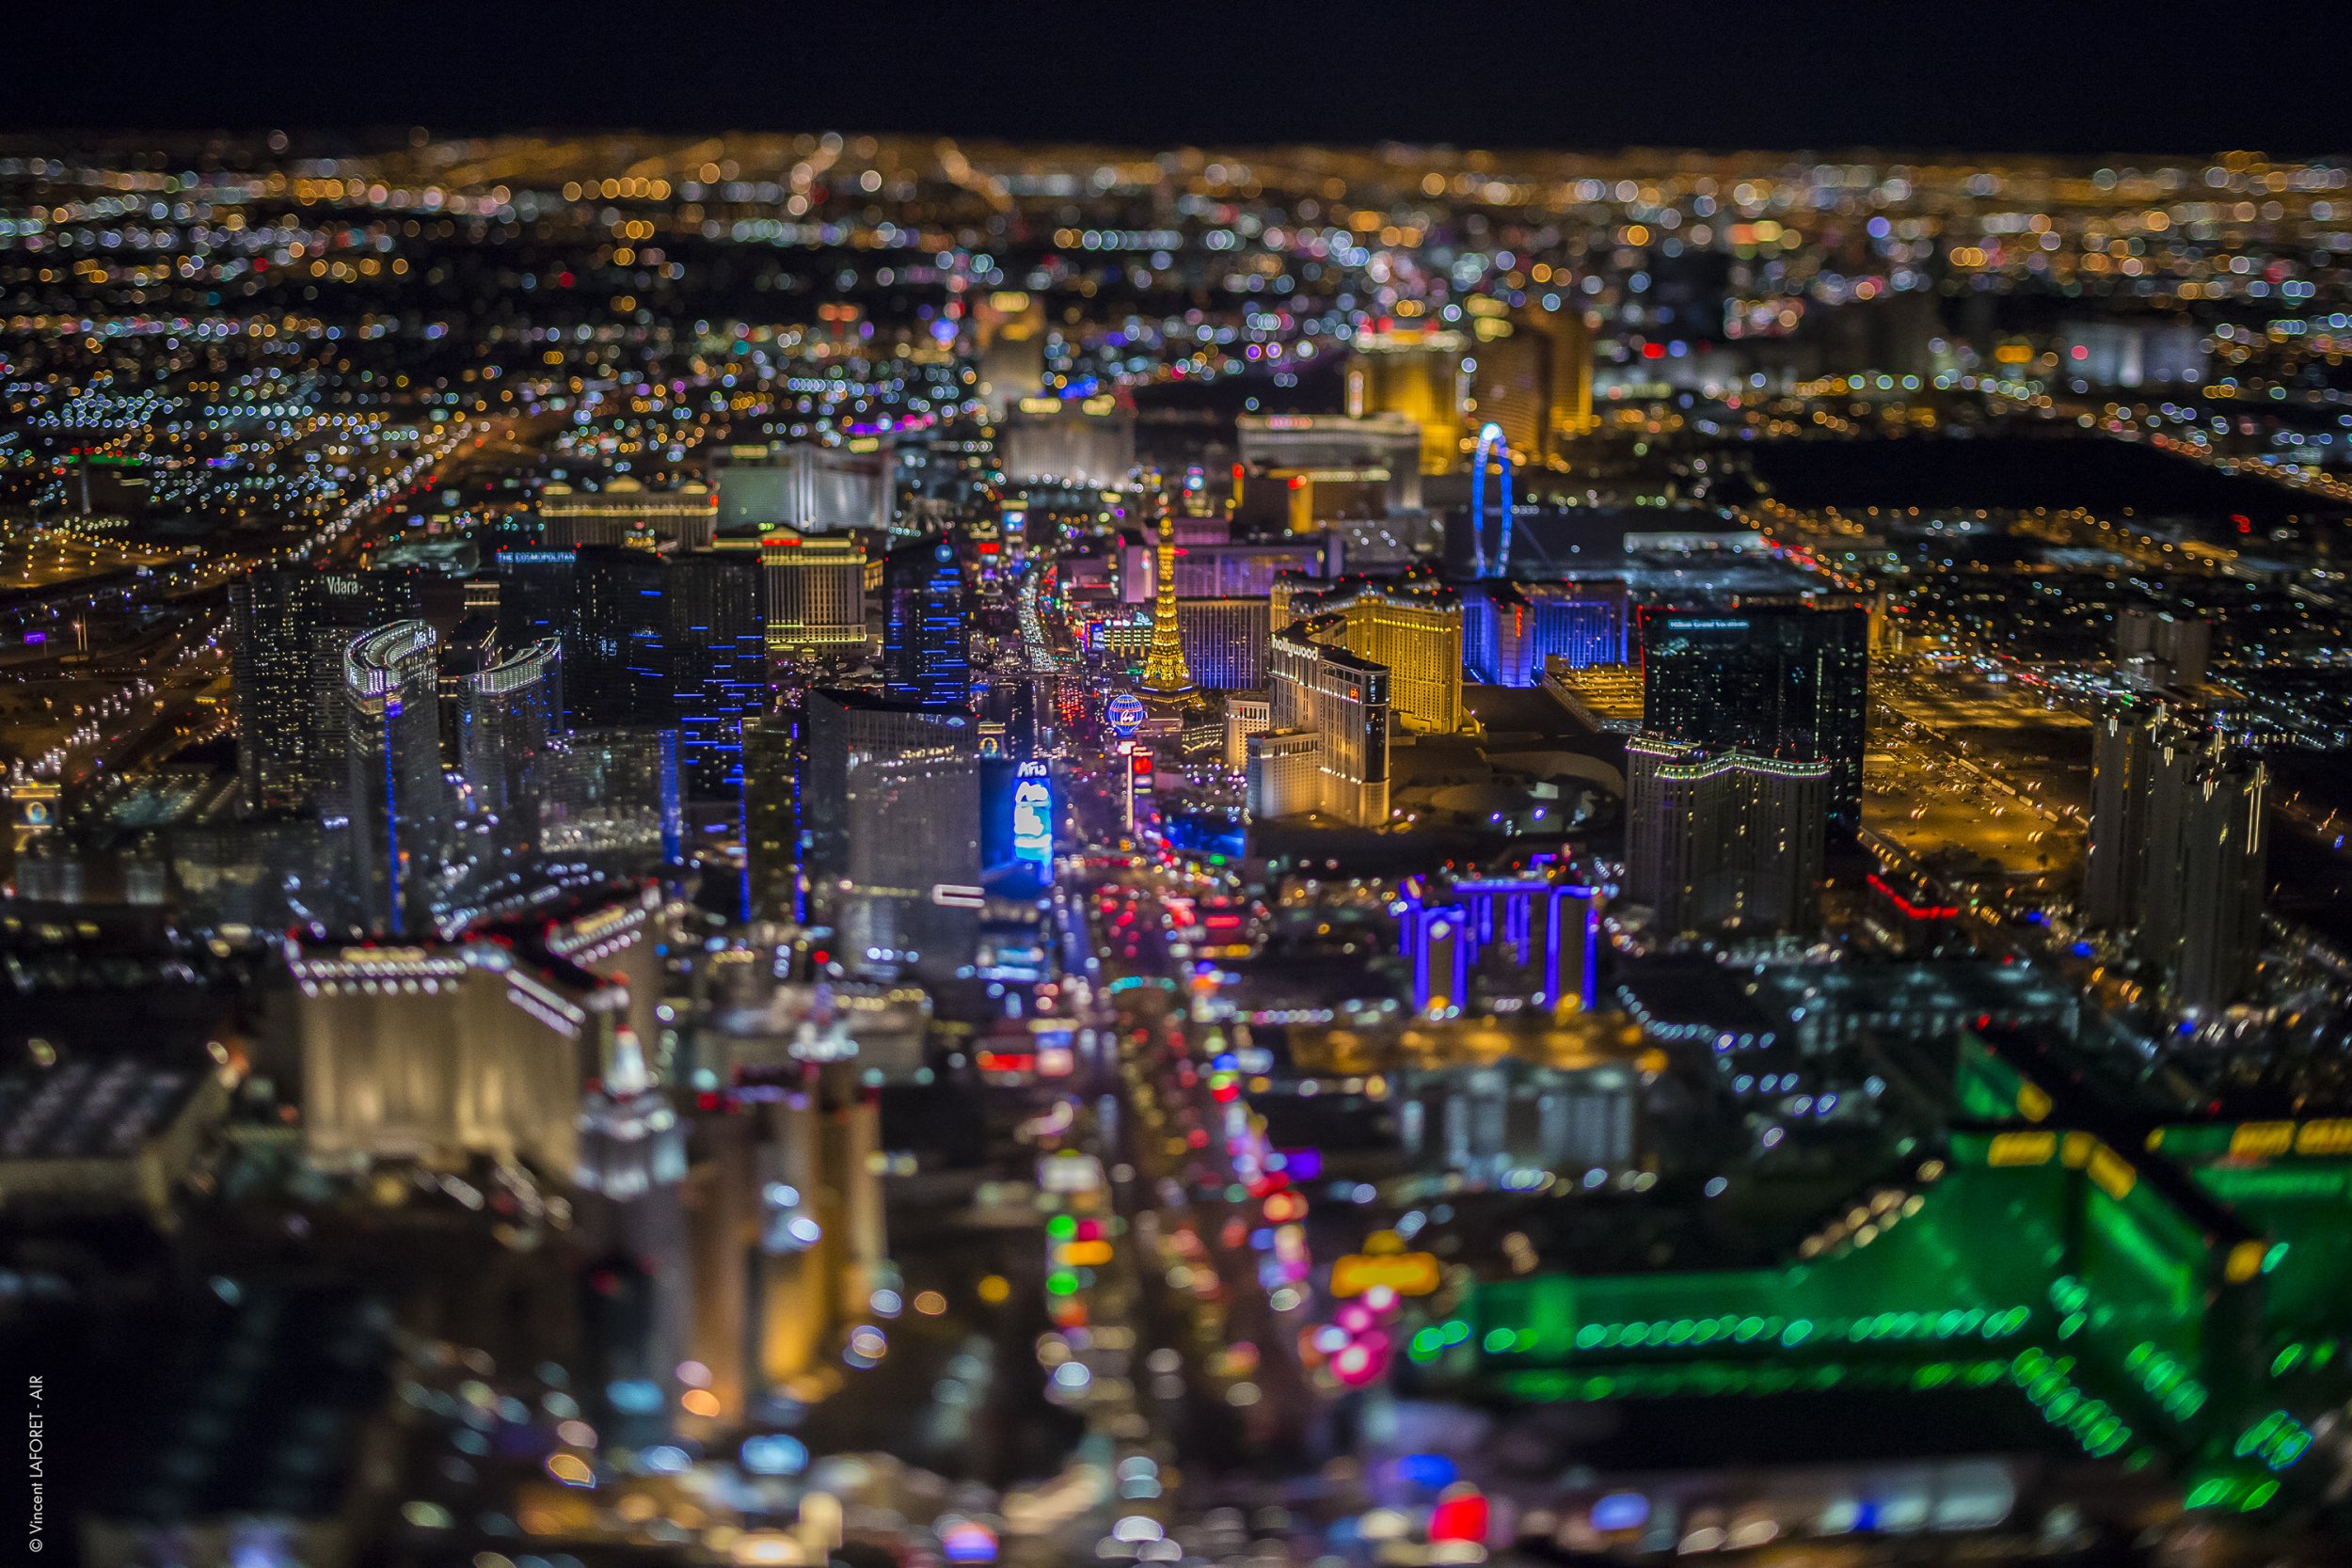 The Las Vegas Strip from the Air and at Night